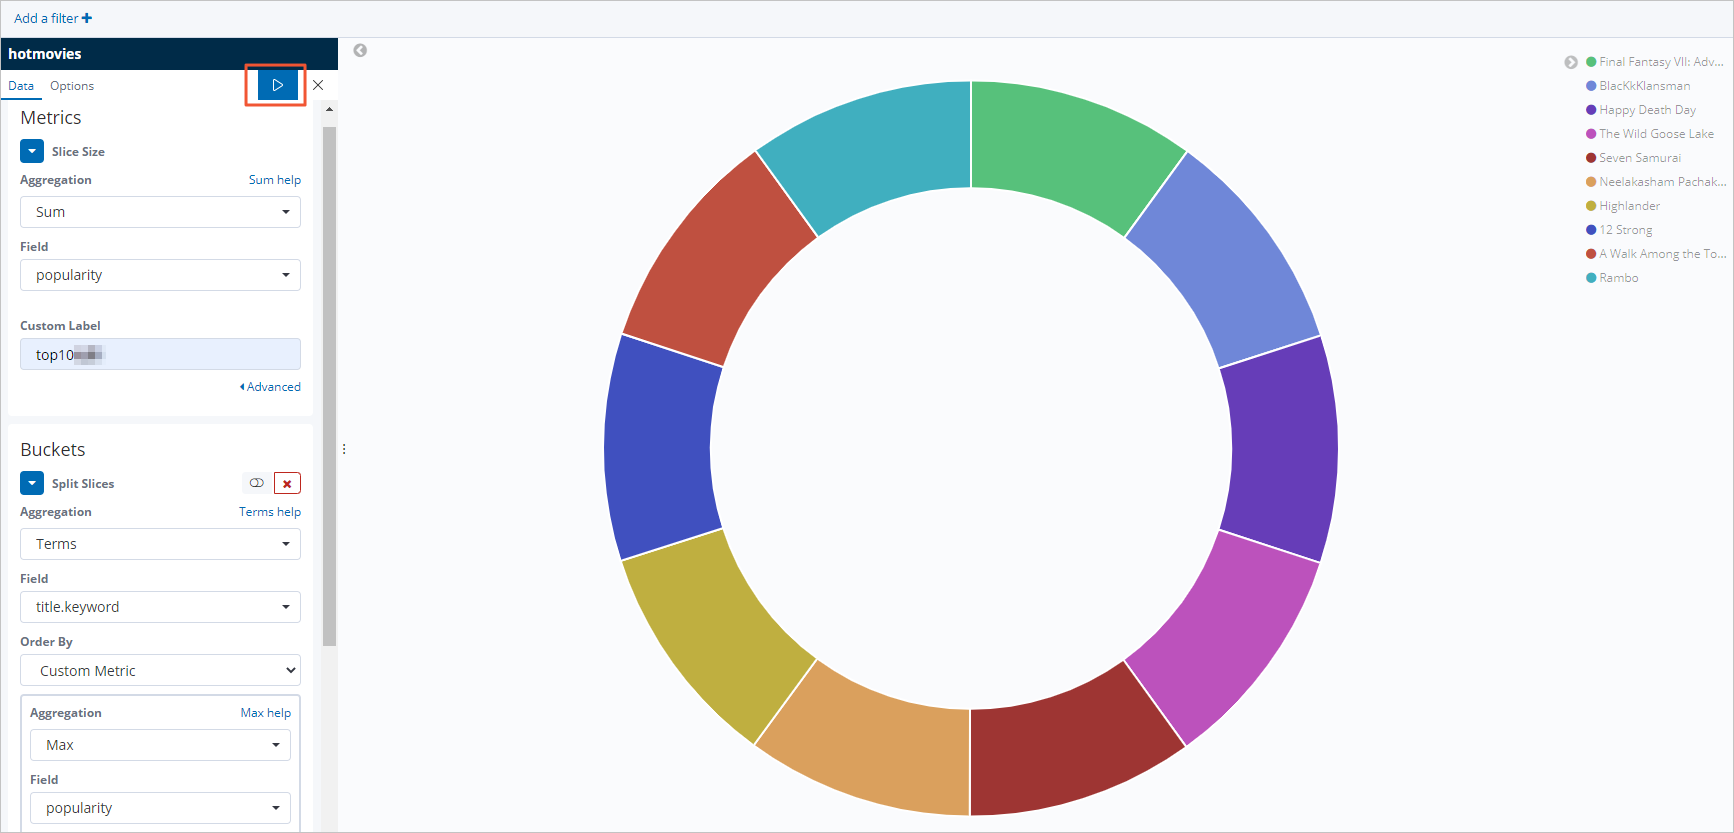 Display results in a pie chart